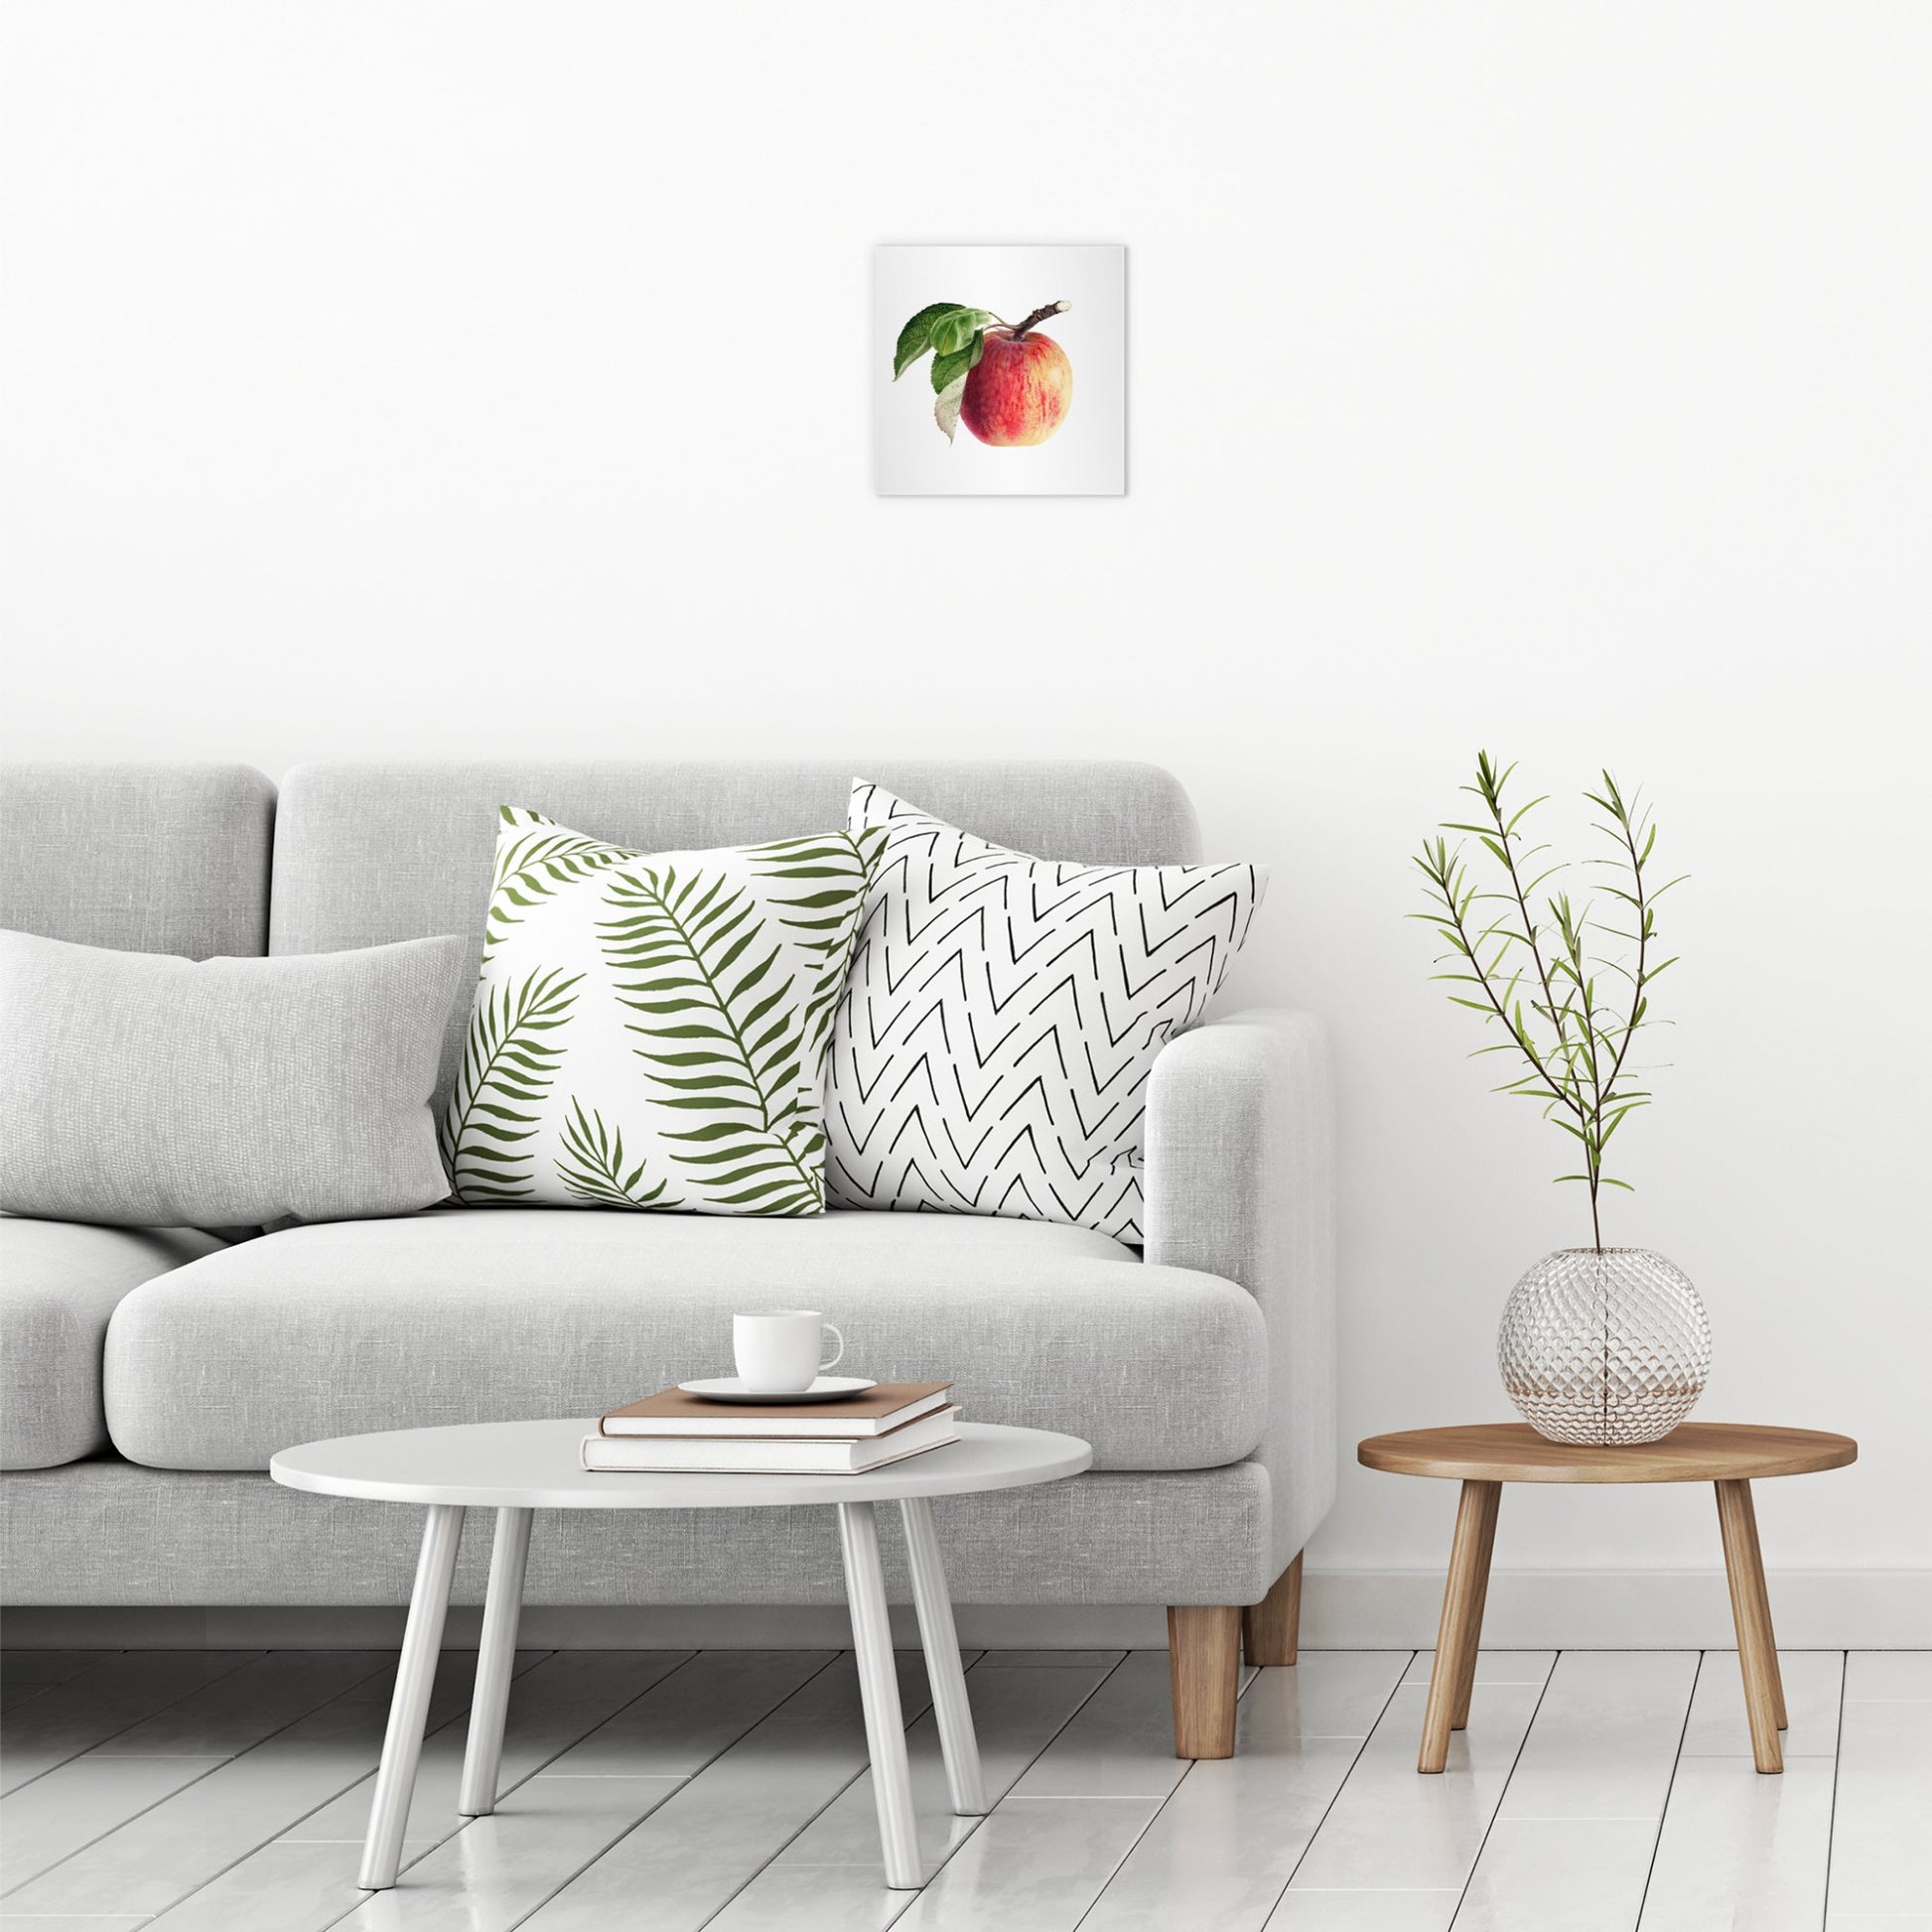 A contemporary modern room view showing a small size metal art poster display plate with printed design of a Vintage Apple Illustration